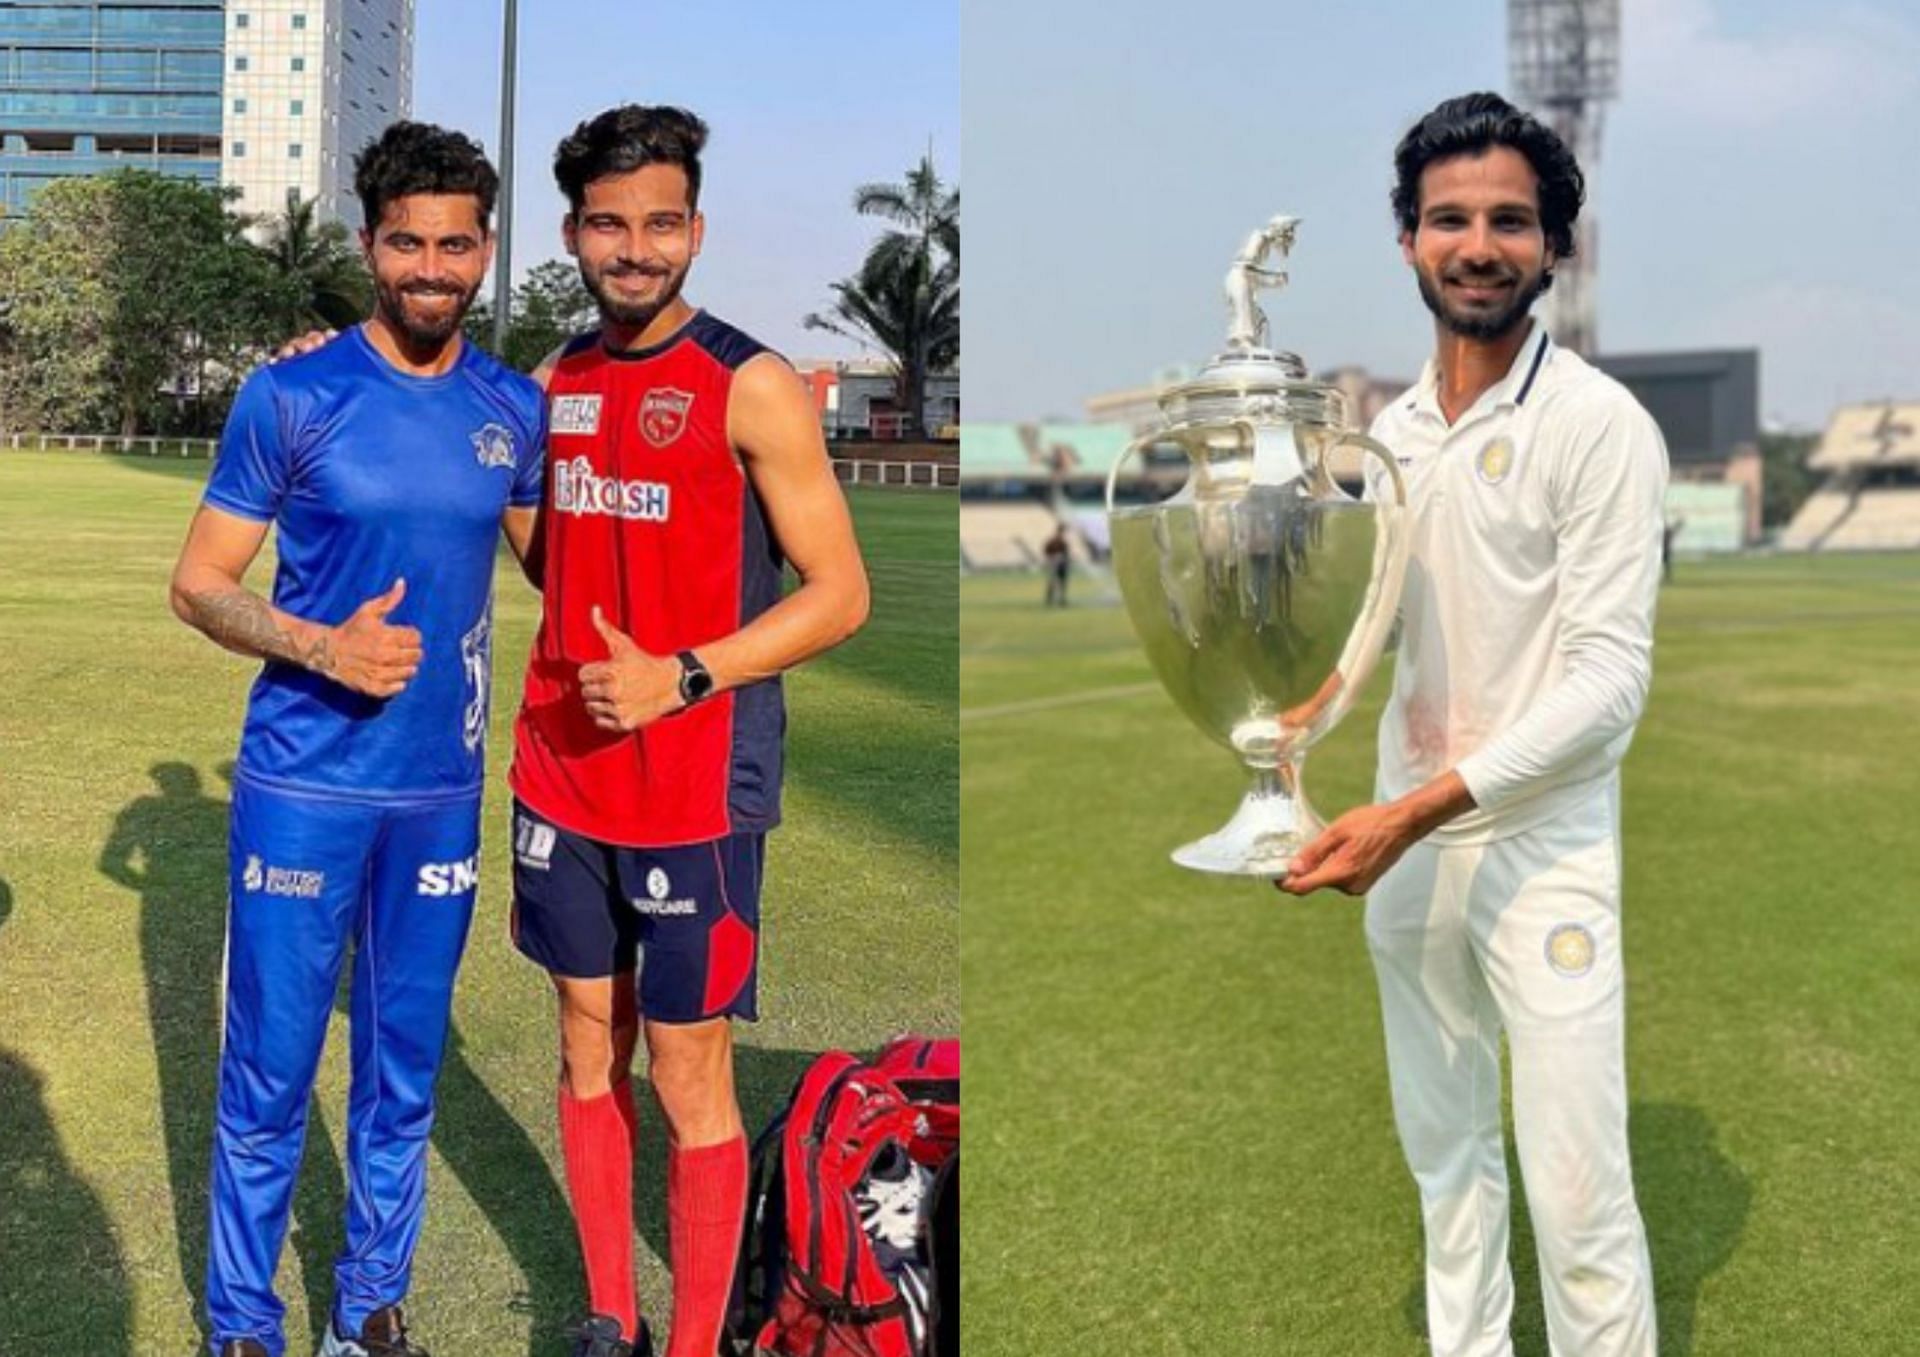 From rubbing shoulders with Ravindra Jadeja to holding the Ranji Trophy, Prerak Mankad has had a number of takeaways from the recent domestic season (Picture Credits: Instagram/Prerak Mankad).